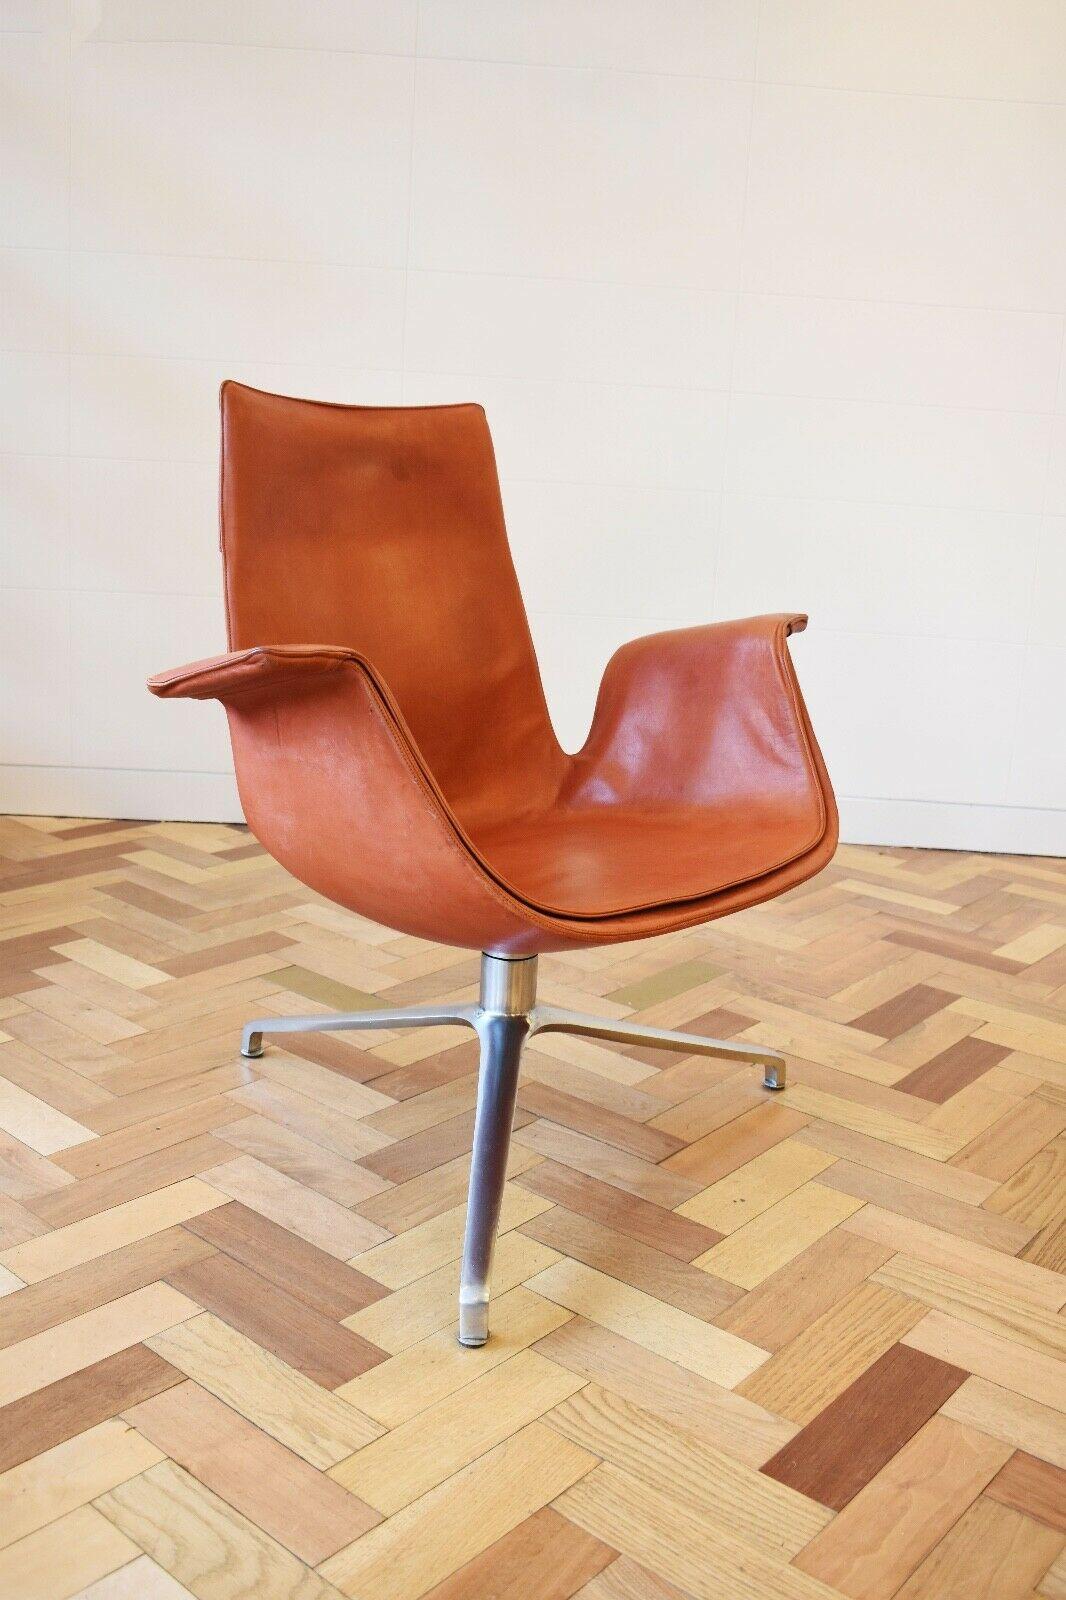 A vintage Tulip chair model ' FK6725' designed by Preben Fabricius and Jorgen Kastholm & made by Alfred Kill International in its original tan leather, 1970's set on an aluminium swivel base.
Preben Fabricius and Jorgen Kastholm are both Danish